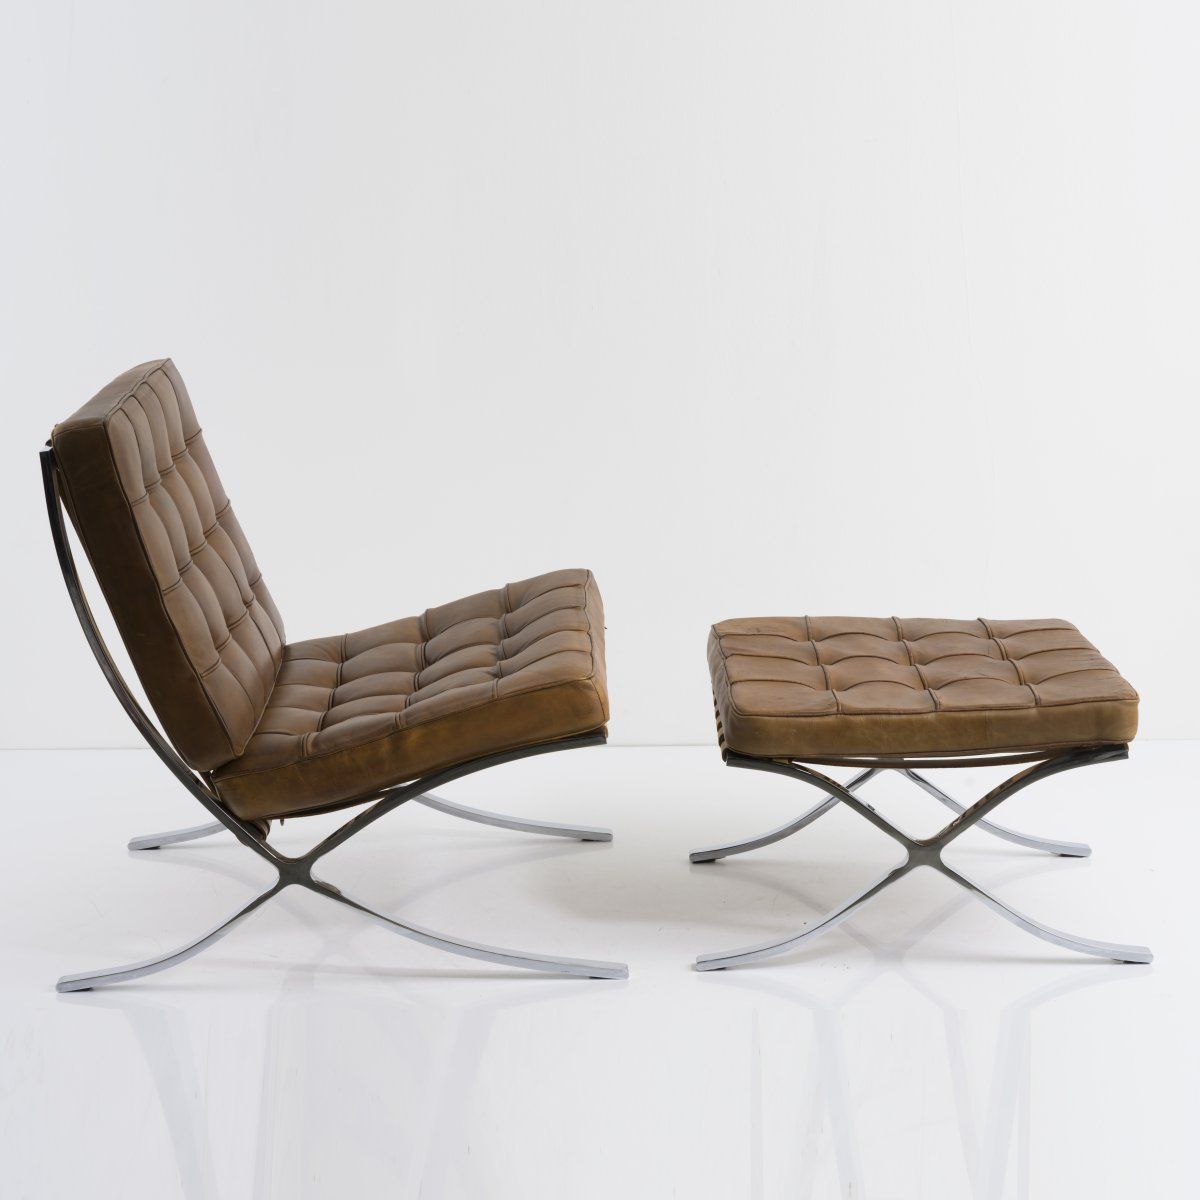 Null Ludwig Mies van der Rohe, 'Barcelona chair' with ottoman, 1929, Lounge chai&hellip;